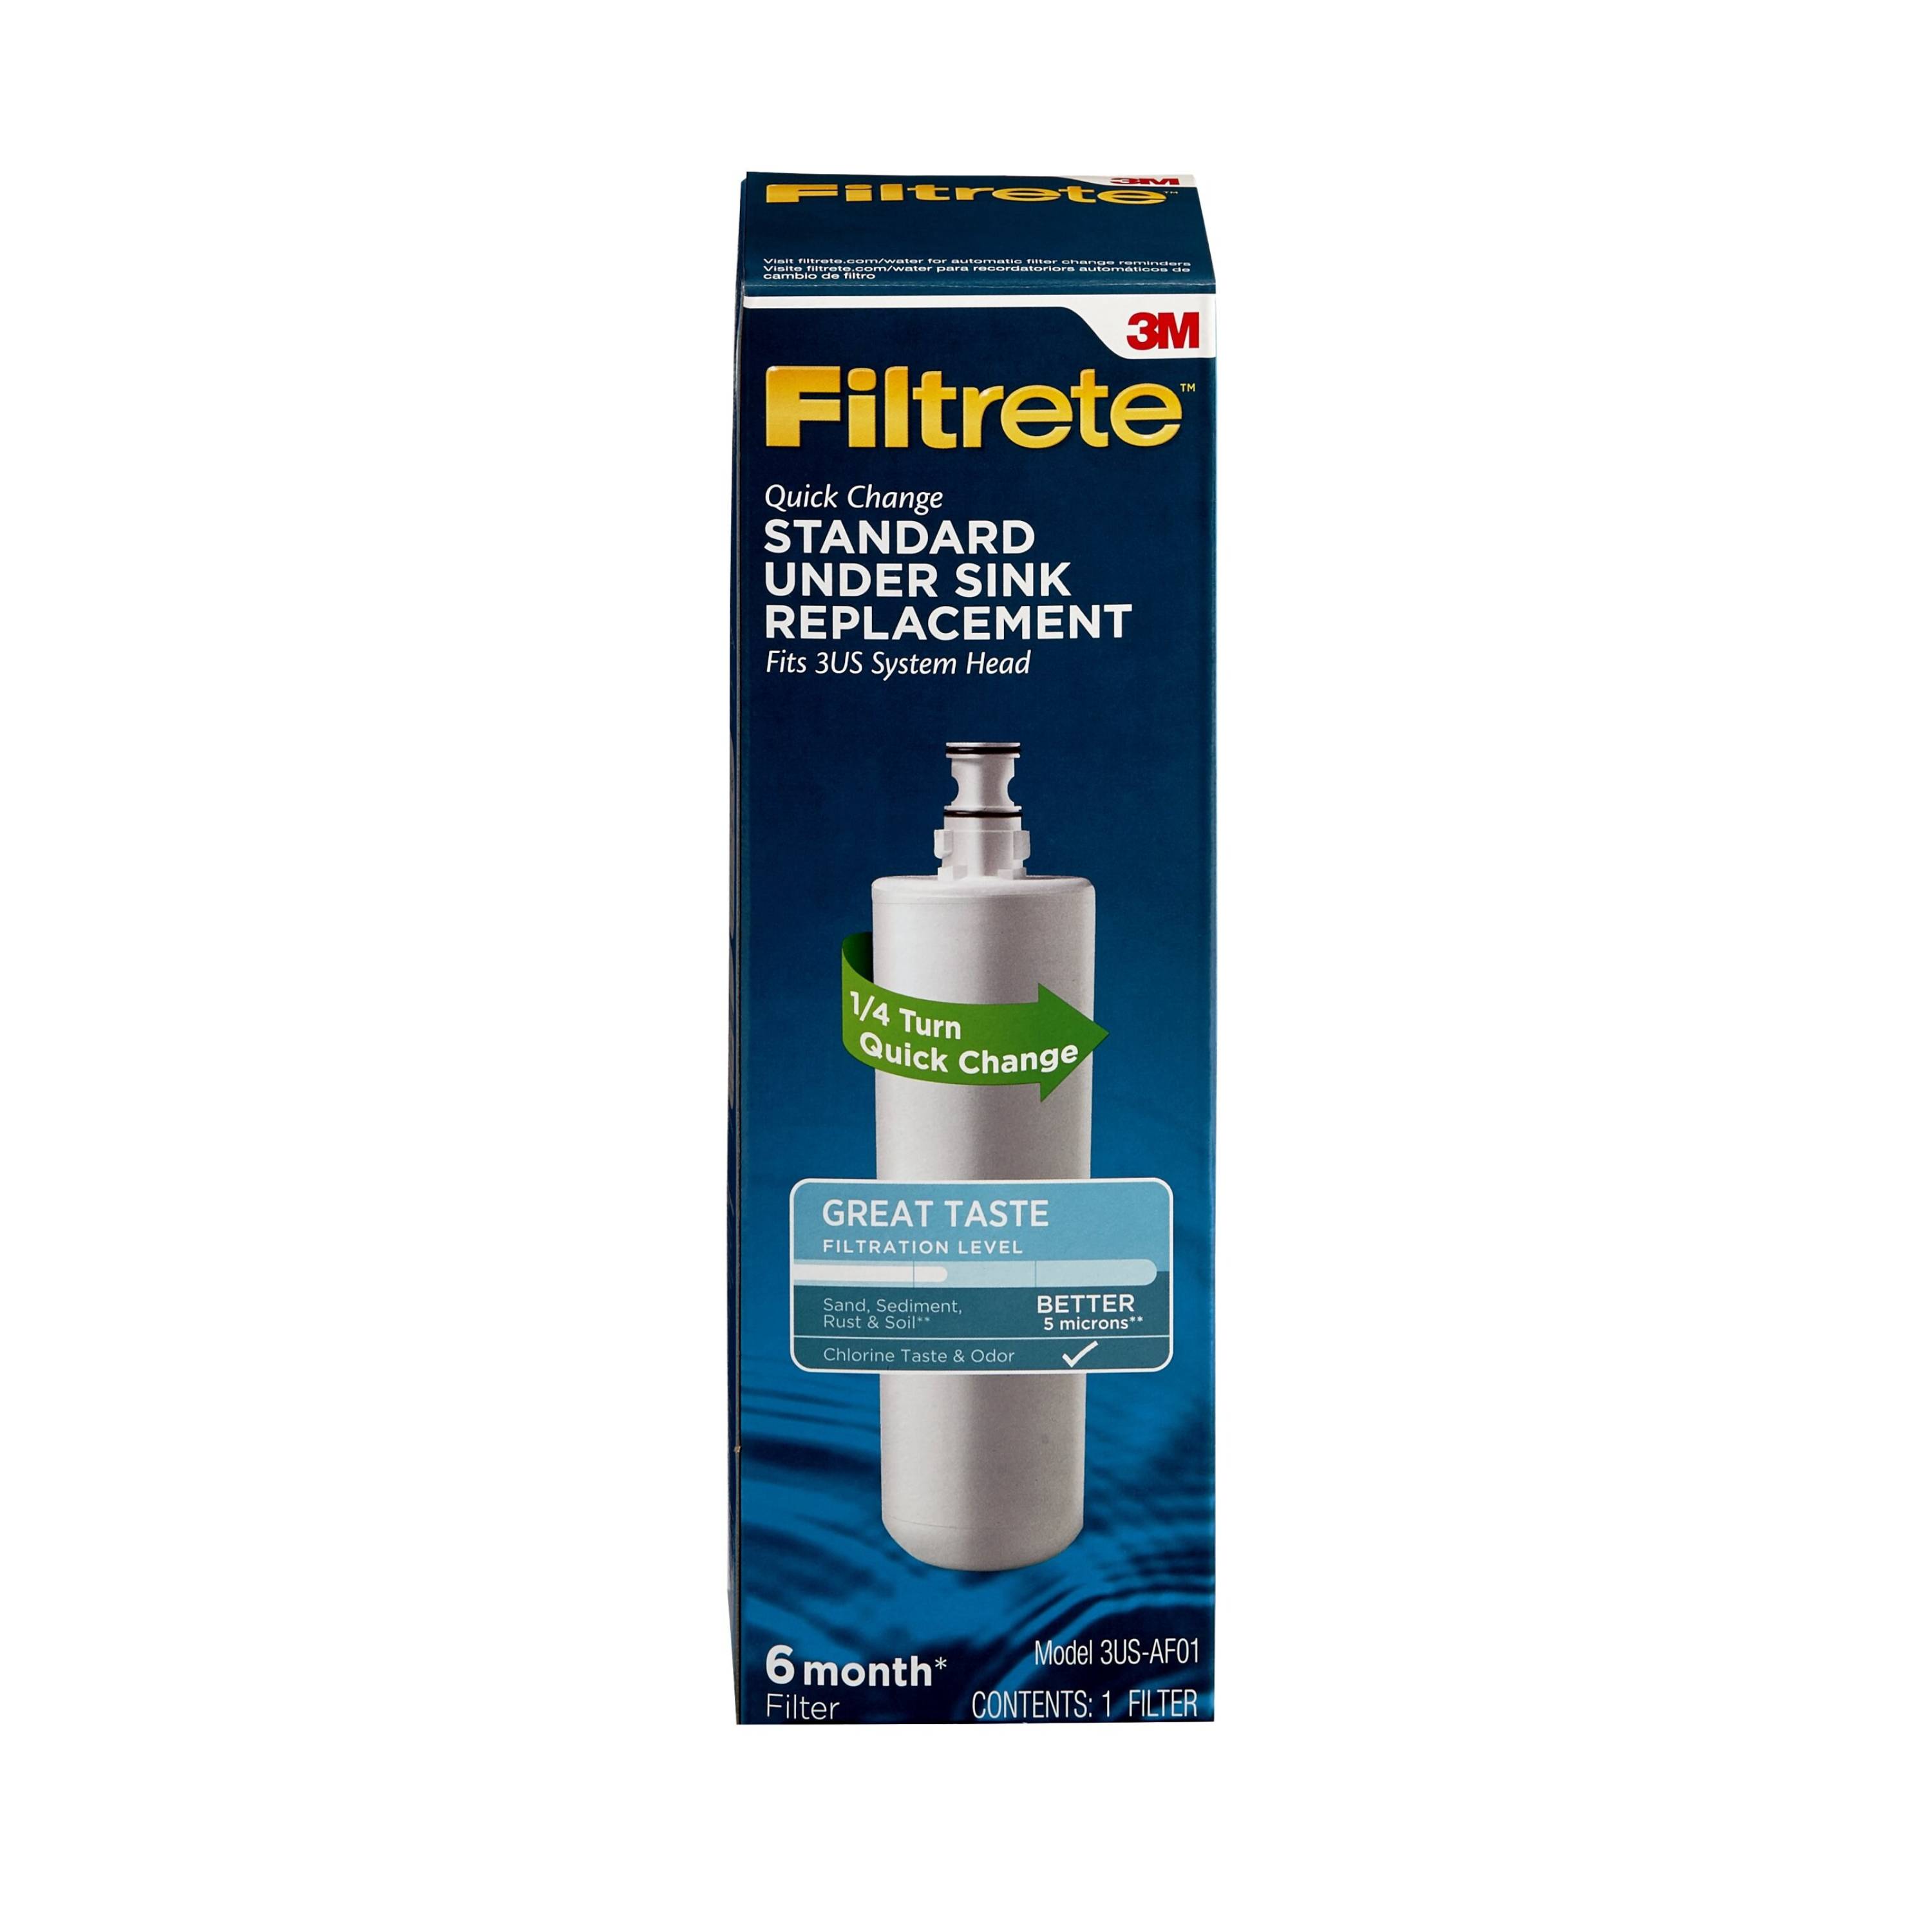 3M Filtrete 3US-AF01 Replacement Water Filter